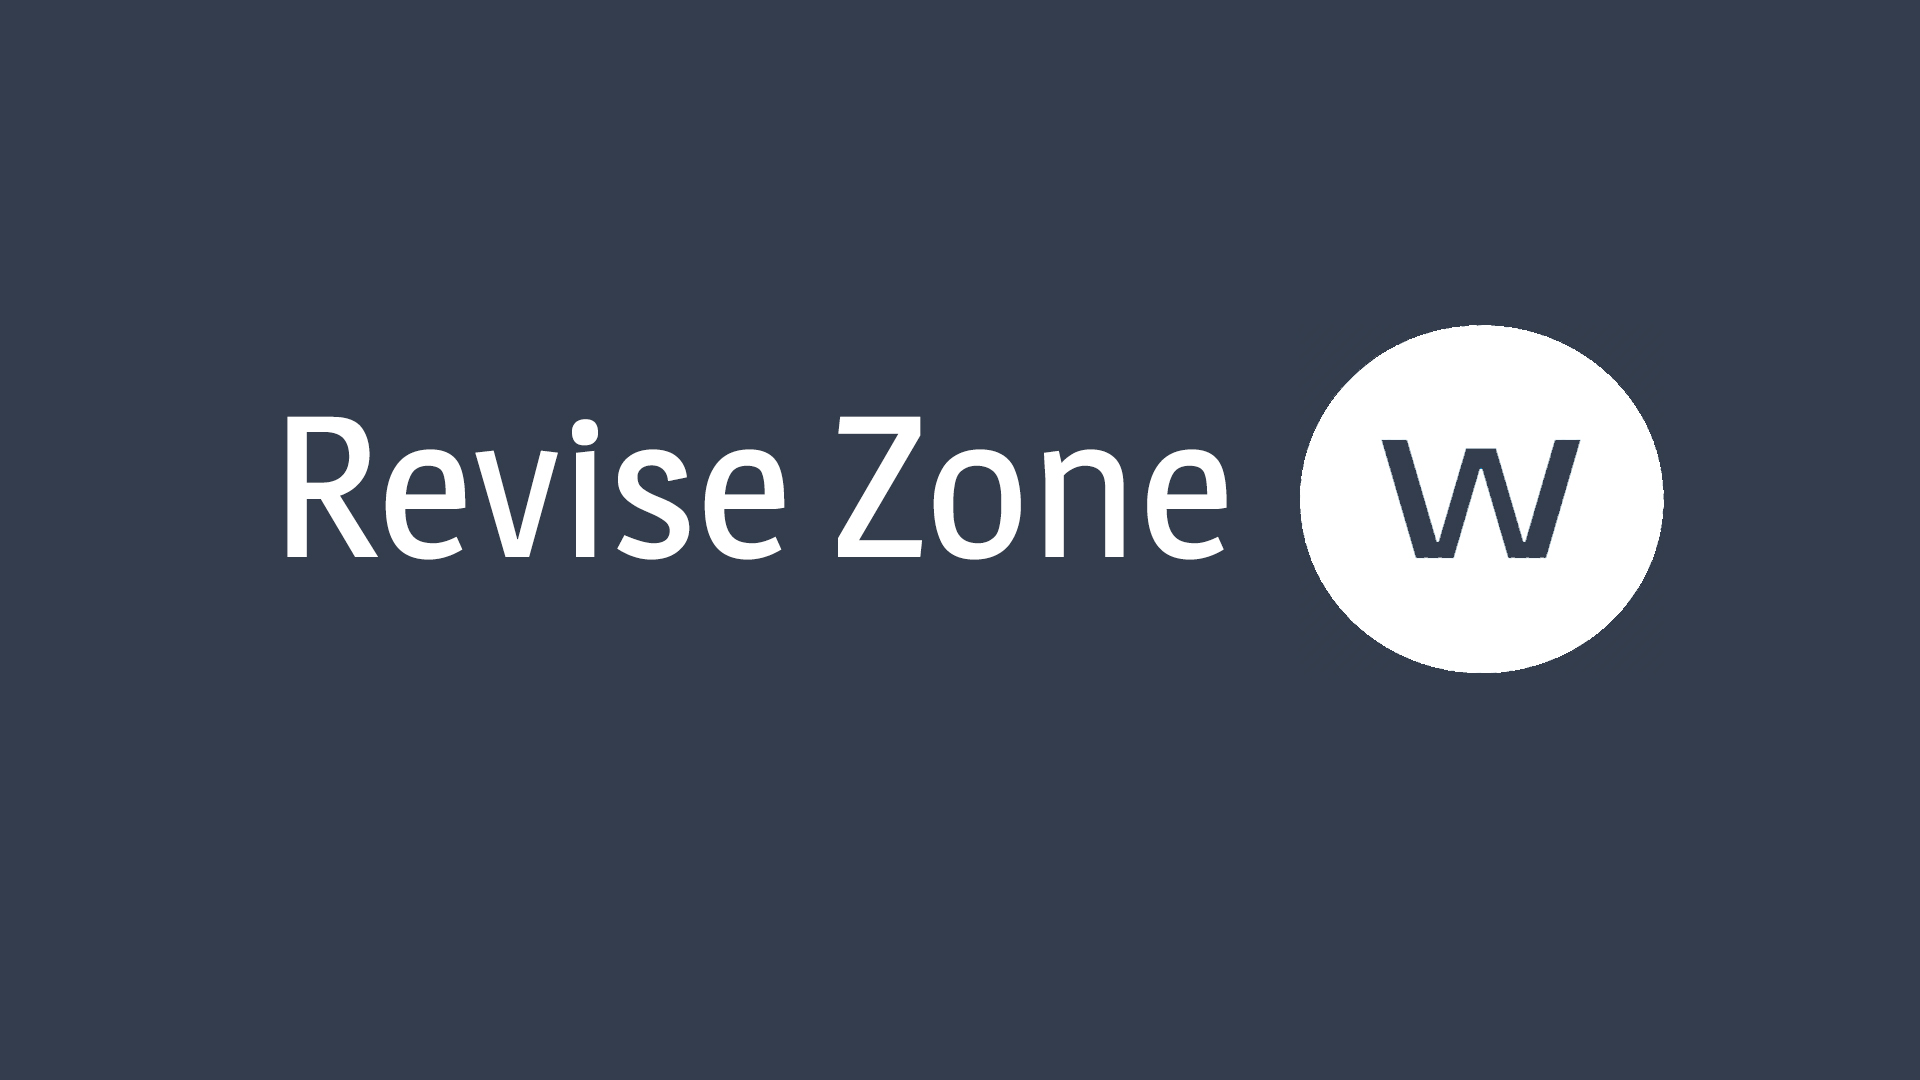 The revise zone logo and cover